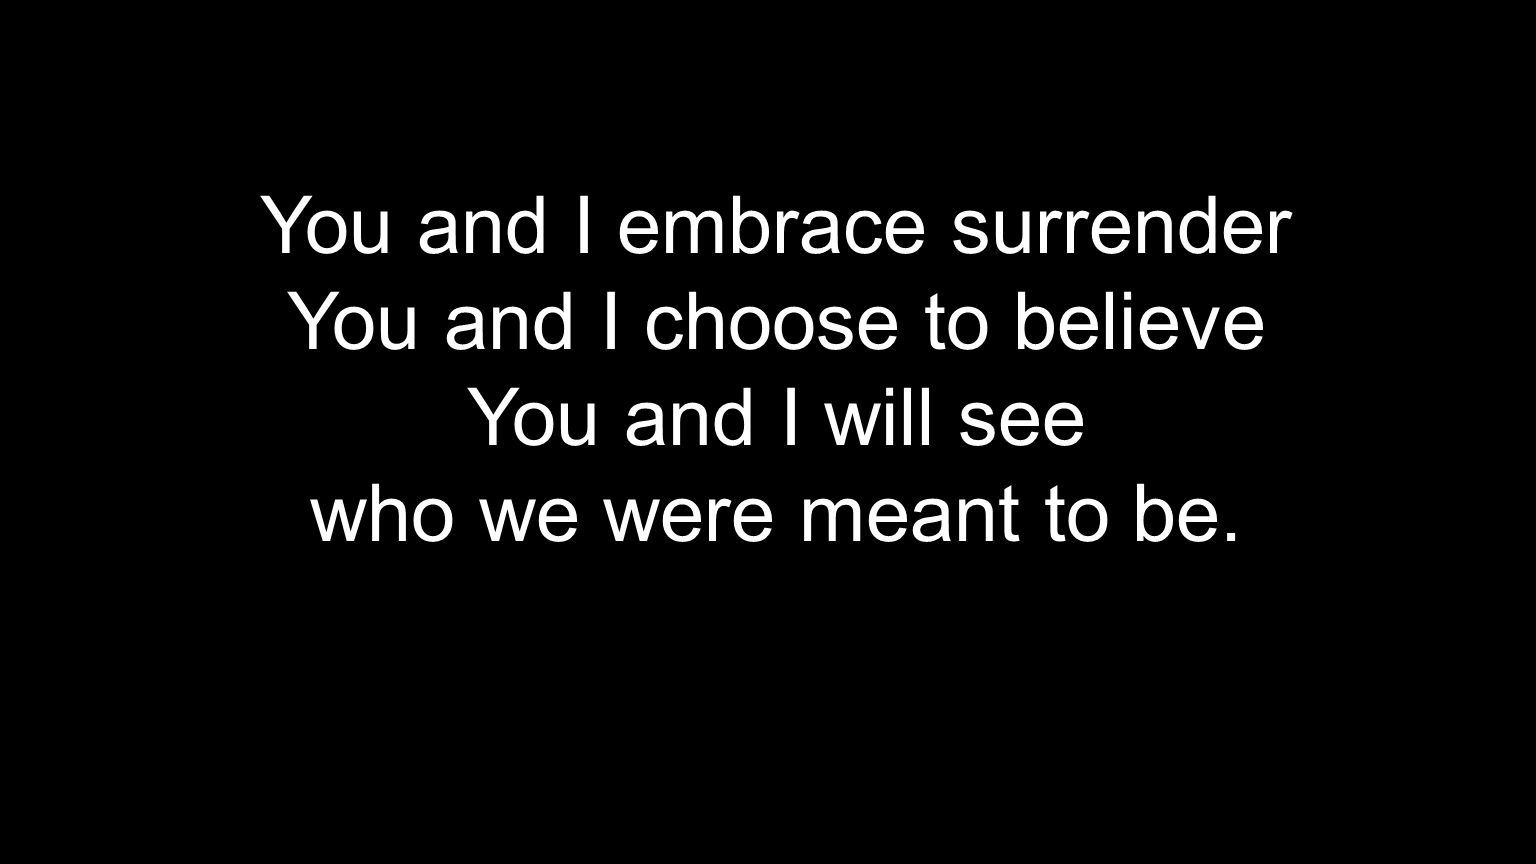 You and I embrace surrender You and I choose to believe You and I will see who we were meant to be.